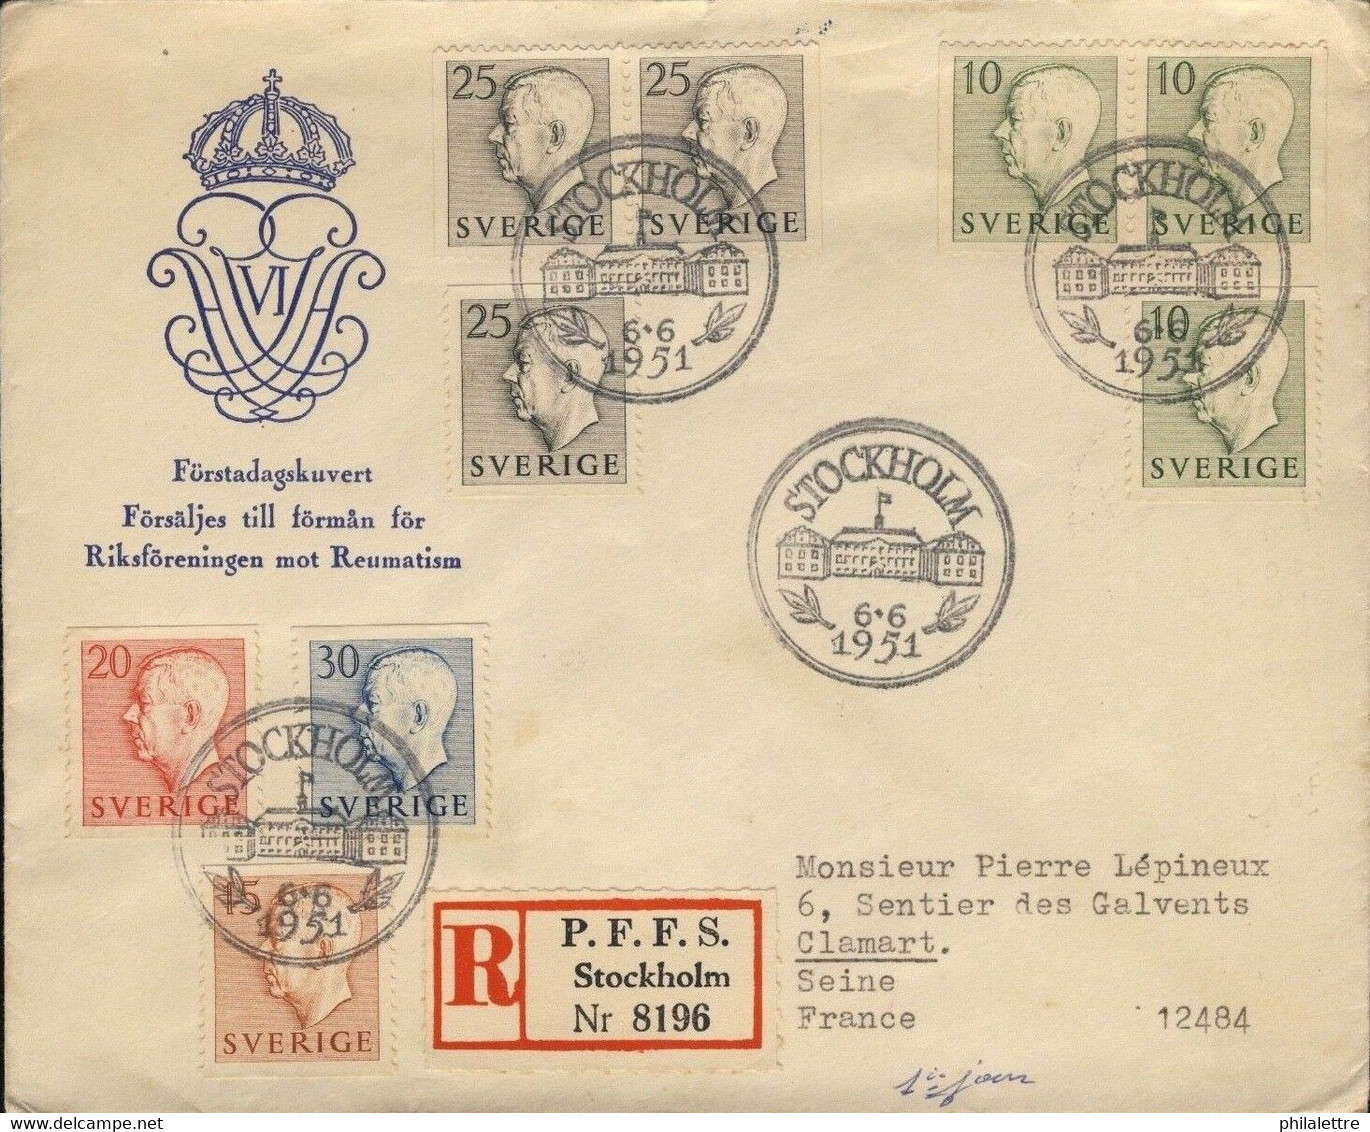 SUÈDE / SWEDEN / SVERIGE - 1951 - MI.356A, 356Dl, 356Dr, 357A, 358A, 359A, 359Dl, 359Dr, 360A On FDC - FDC